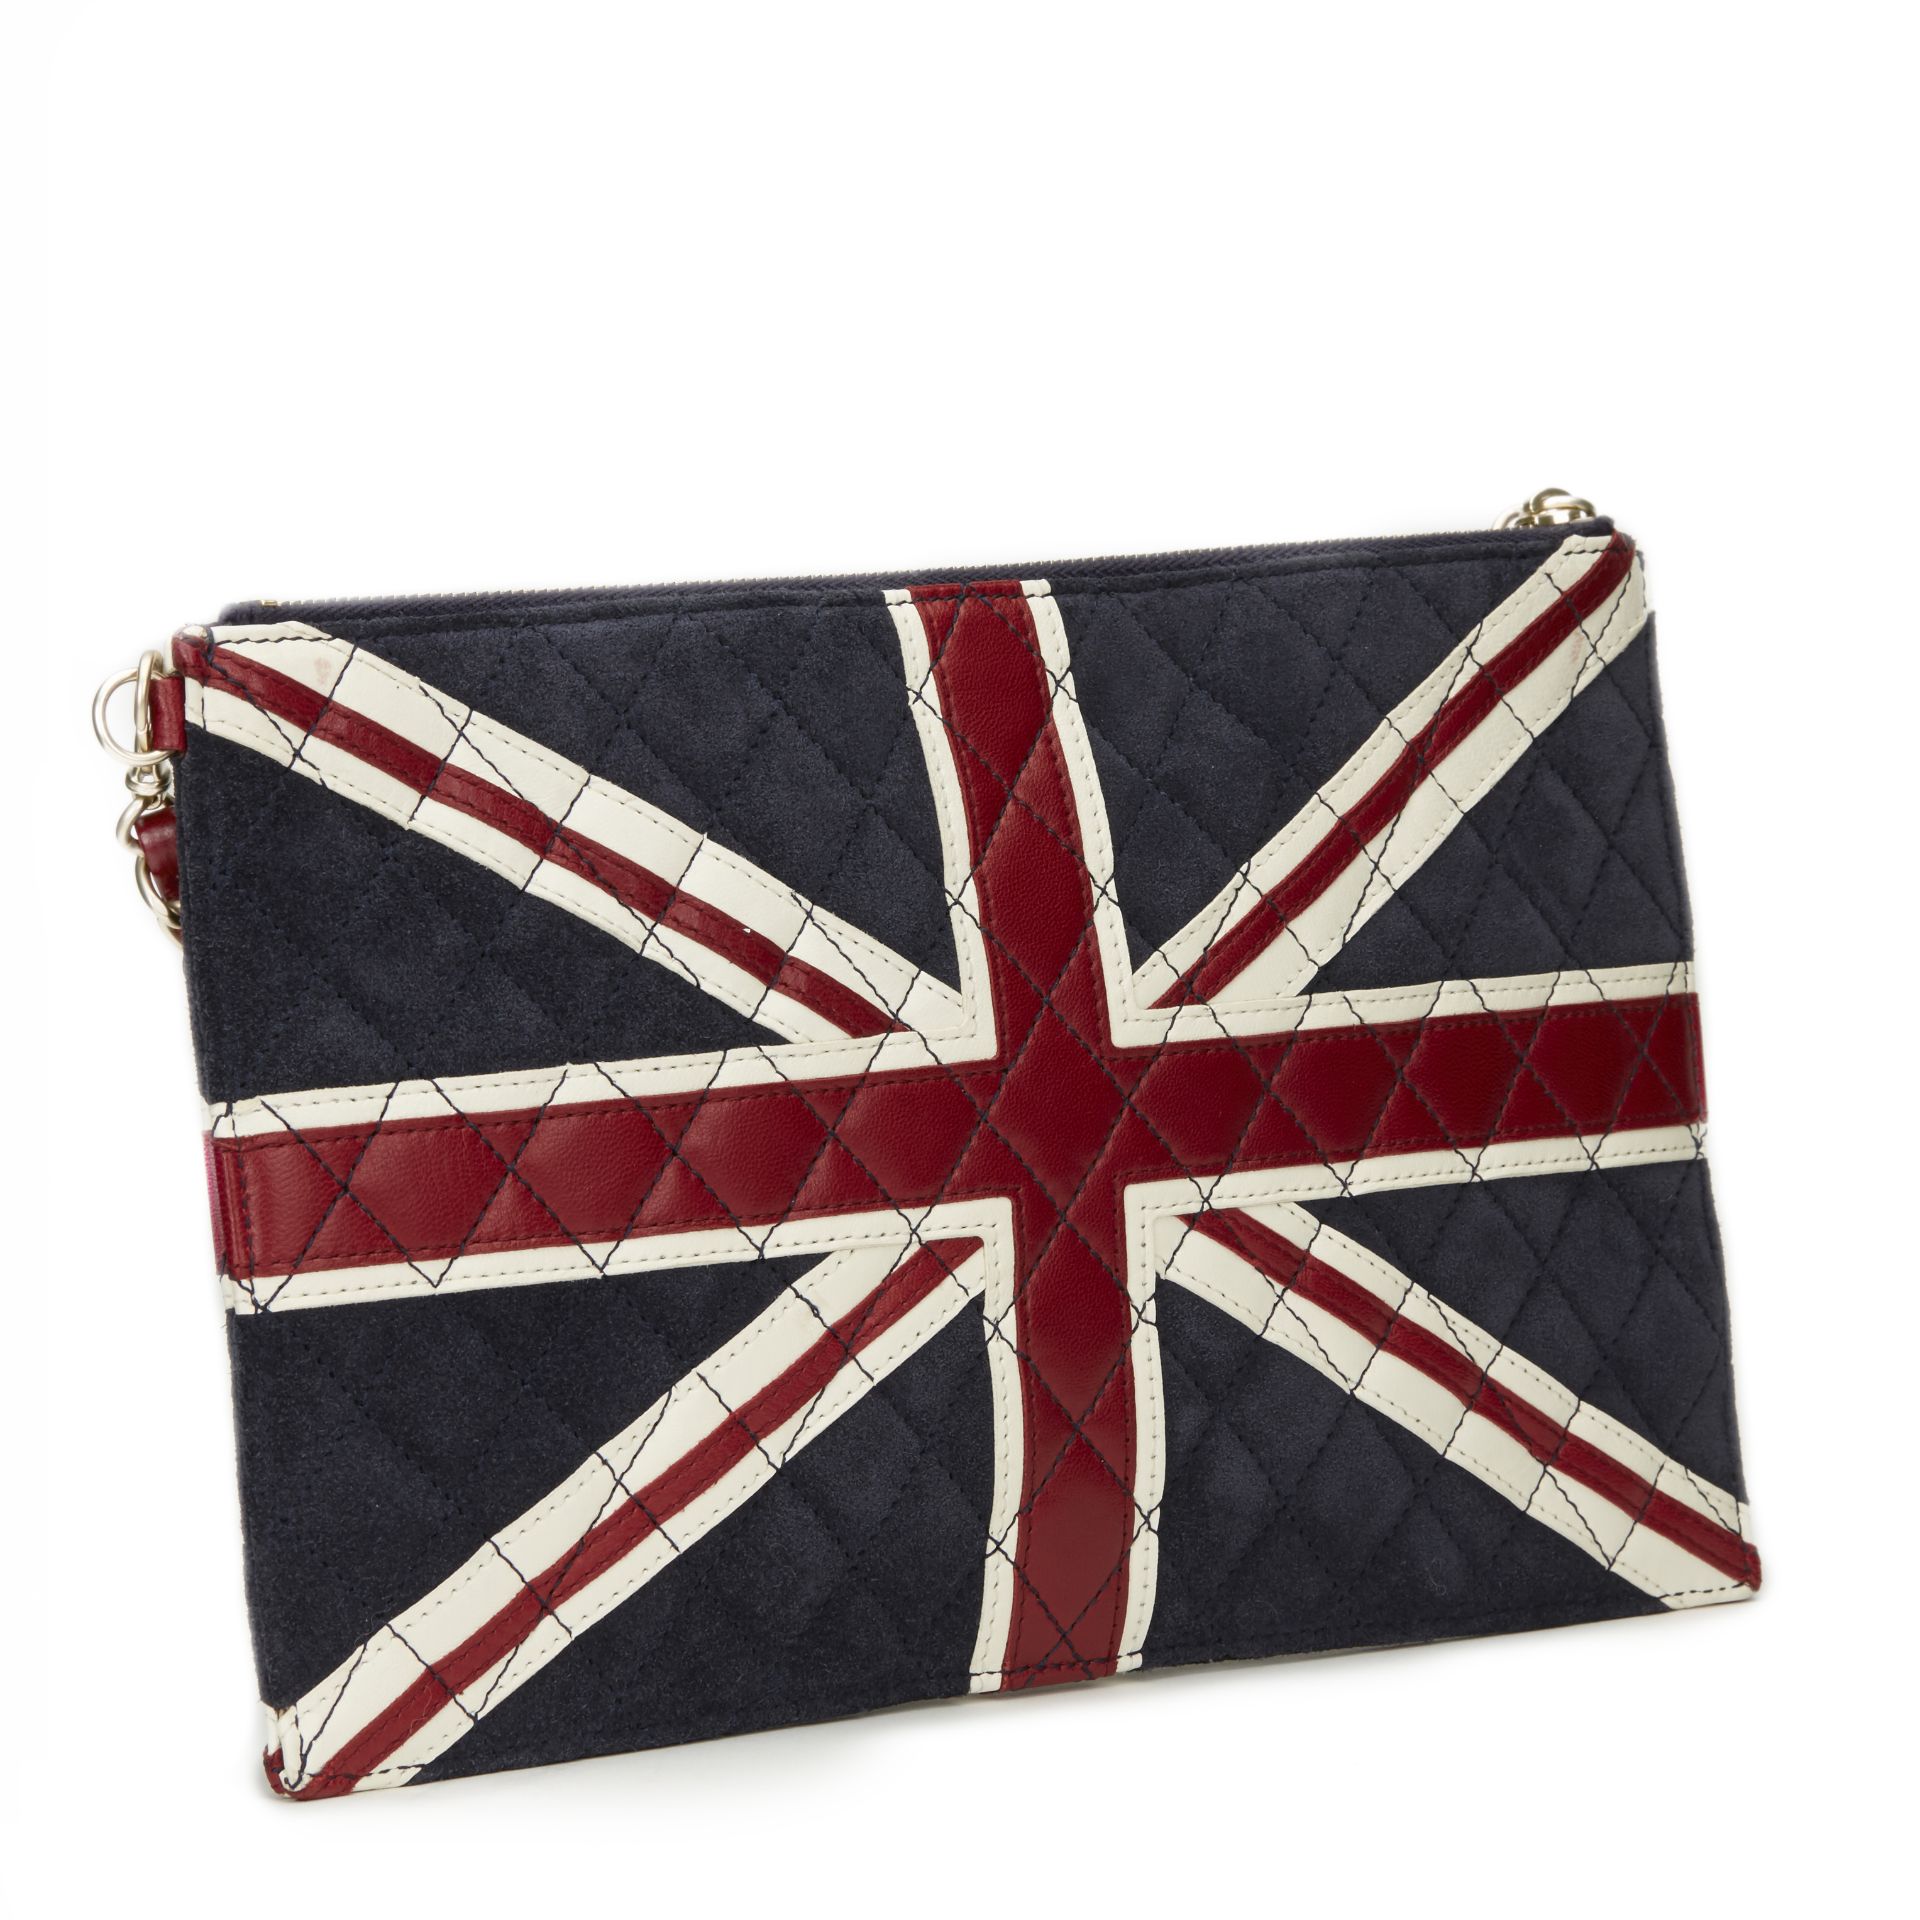 Chanel Union Jack Pouch - Image 4 of 10